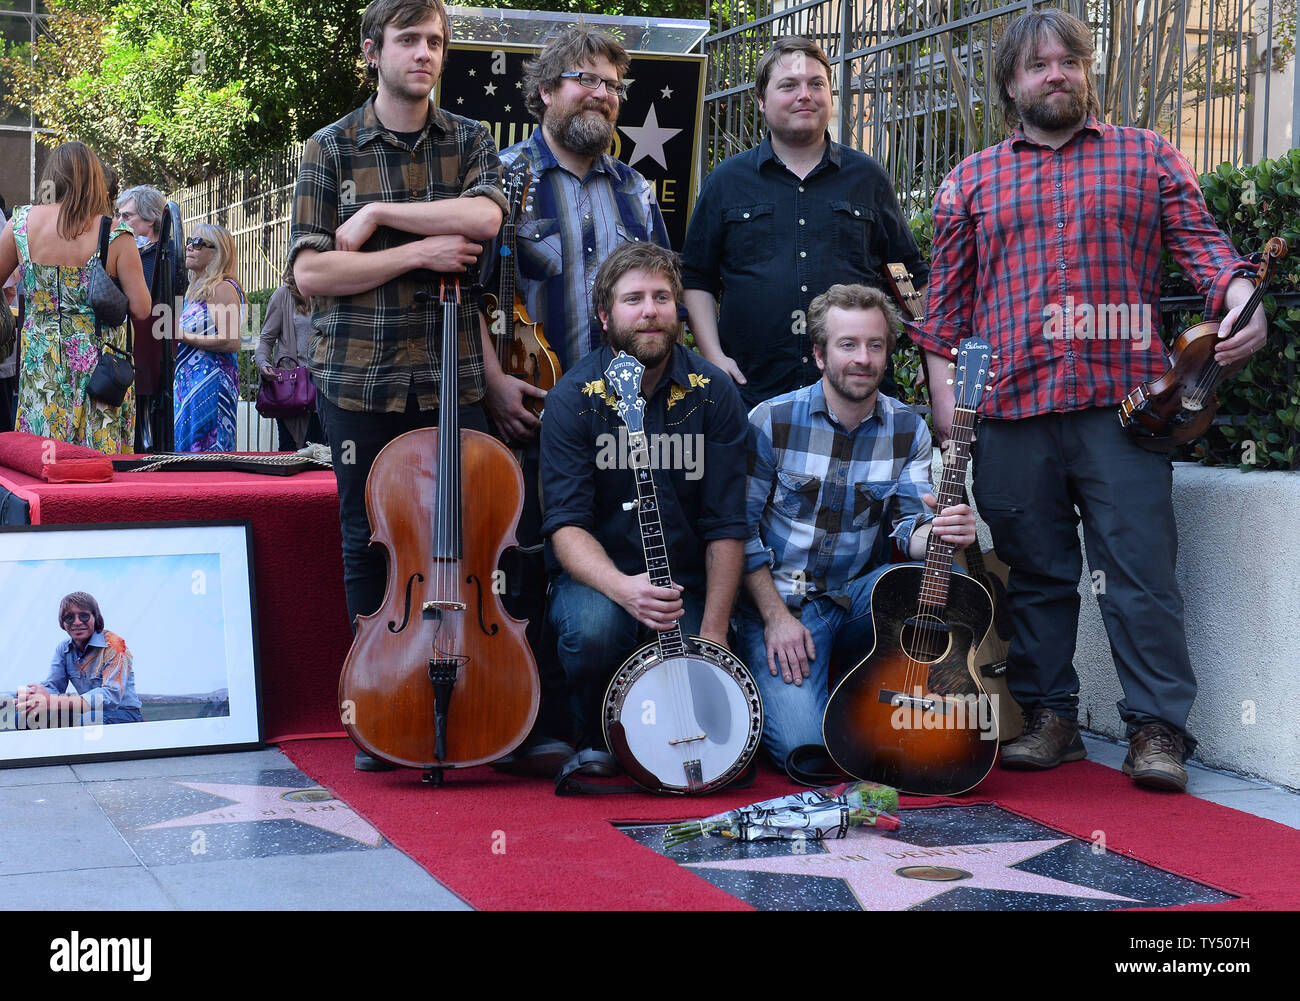 Ryan Young, Erik Berry, Dave Carroll, Tim Saxhaug and Dave Simonett of Trampled By Turtles attend the ceremony honoring John Denver with a posthumous star on the Hollywood Walk of Fame during an unveiling ceremony in Los Angeles on October 24, 2014.  UPI/Jim Ruymen Stock Photo